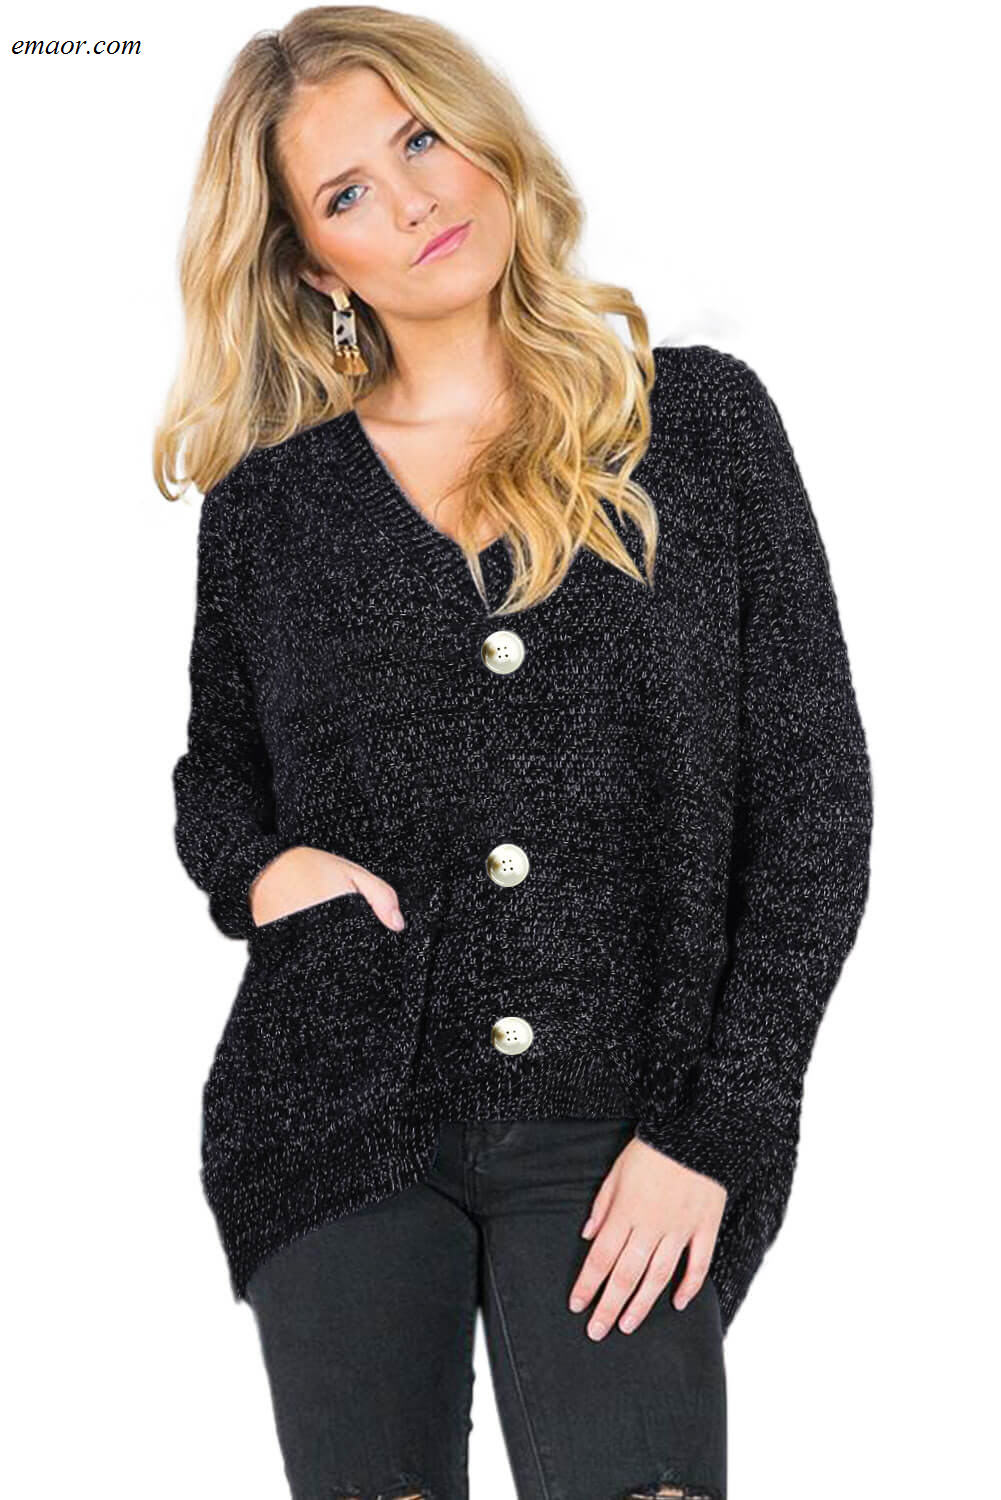 Walmart Ladies Outerwear Volcom Women's Outerwear Swoon And Snuggles Chenille Shift Sweater